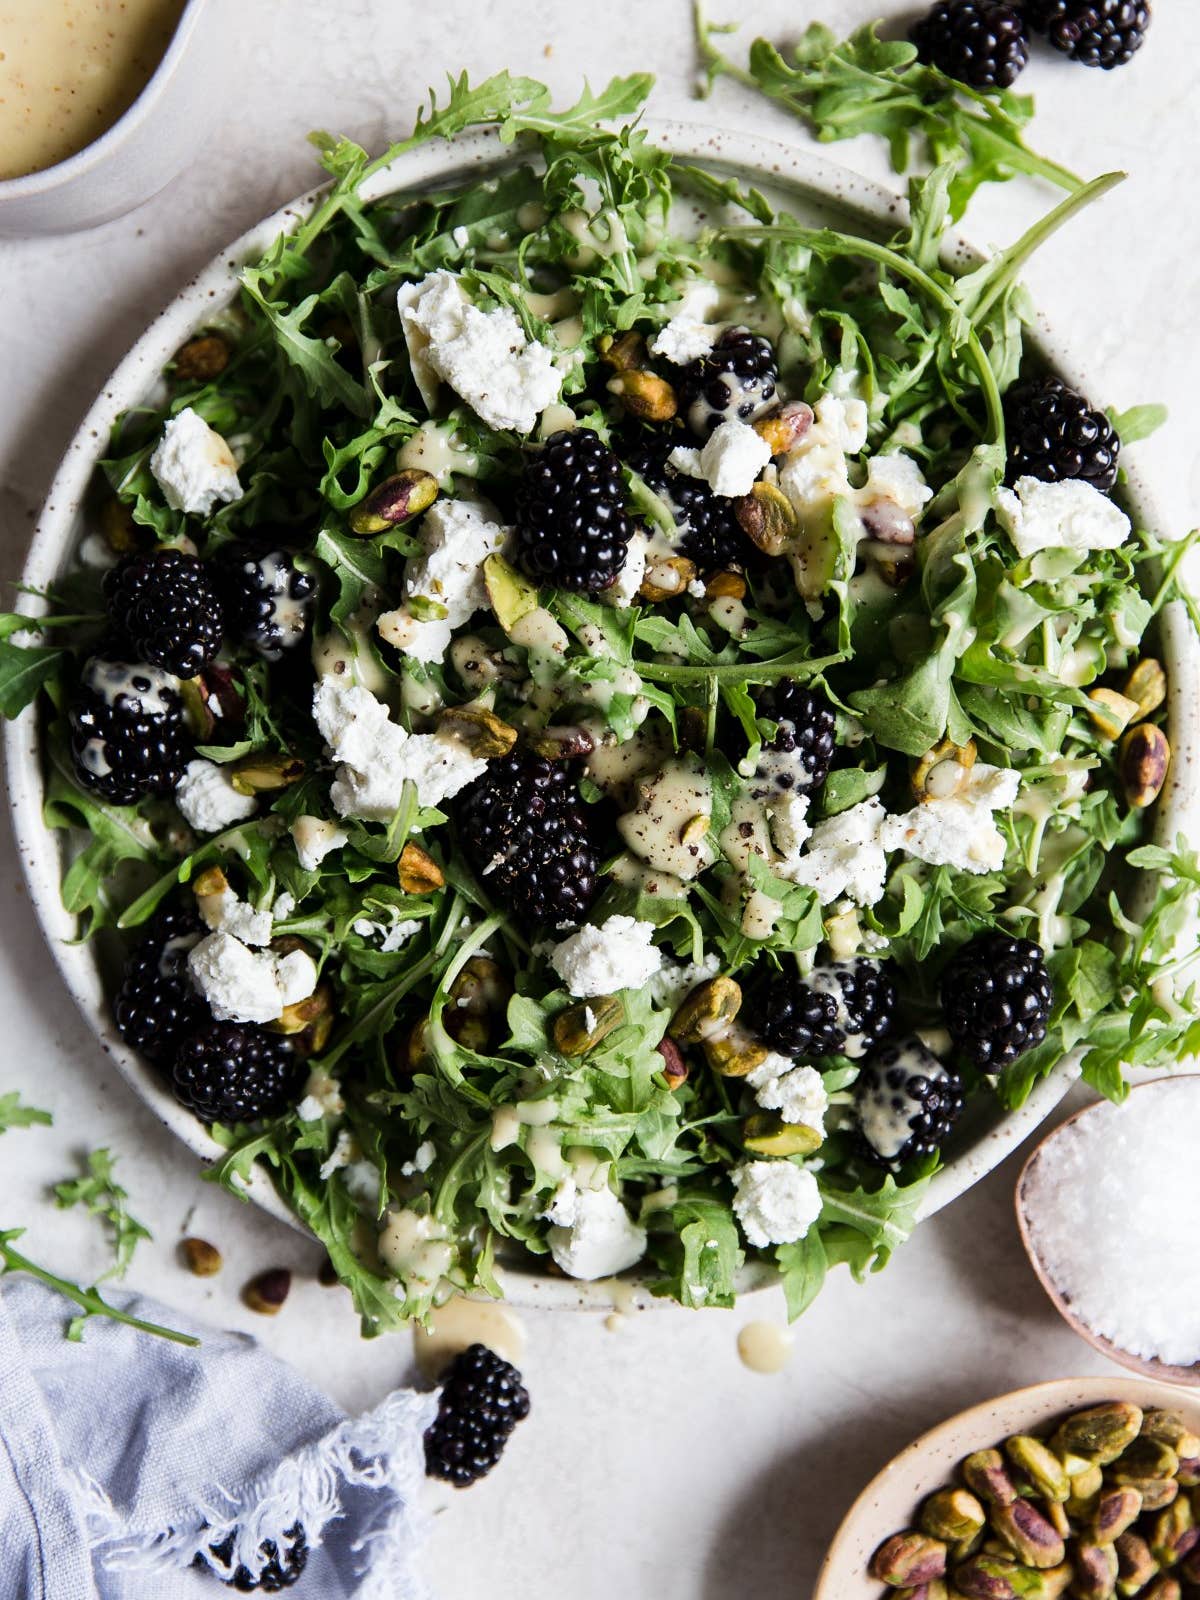 12 Healthy Salad Recipes on a Mission to Eradicate the “Sad Desk Lunch”